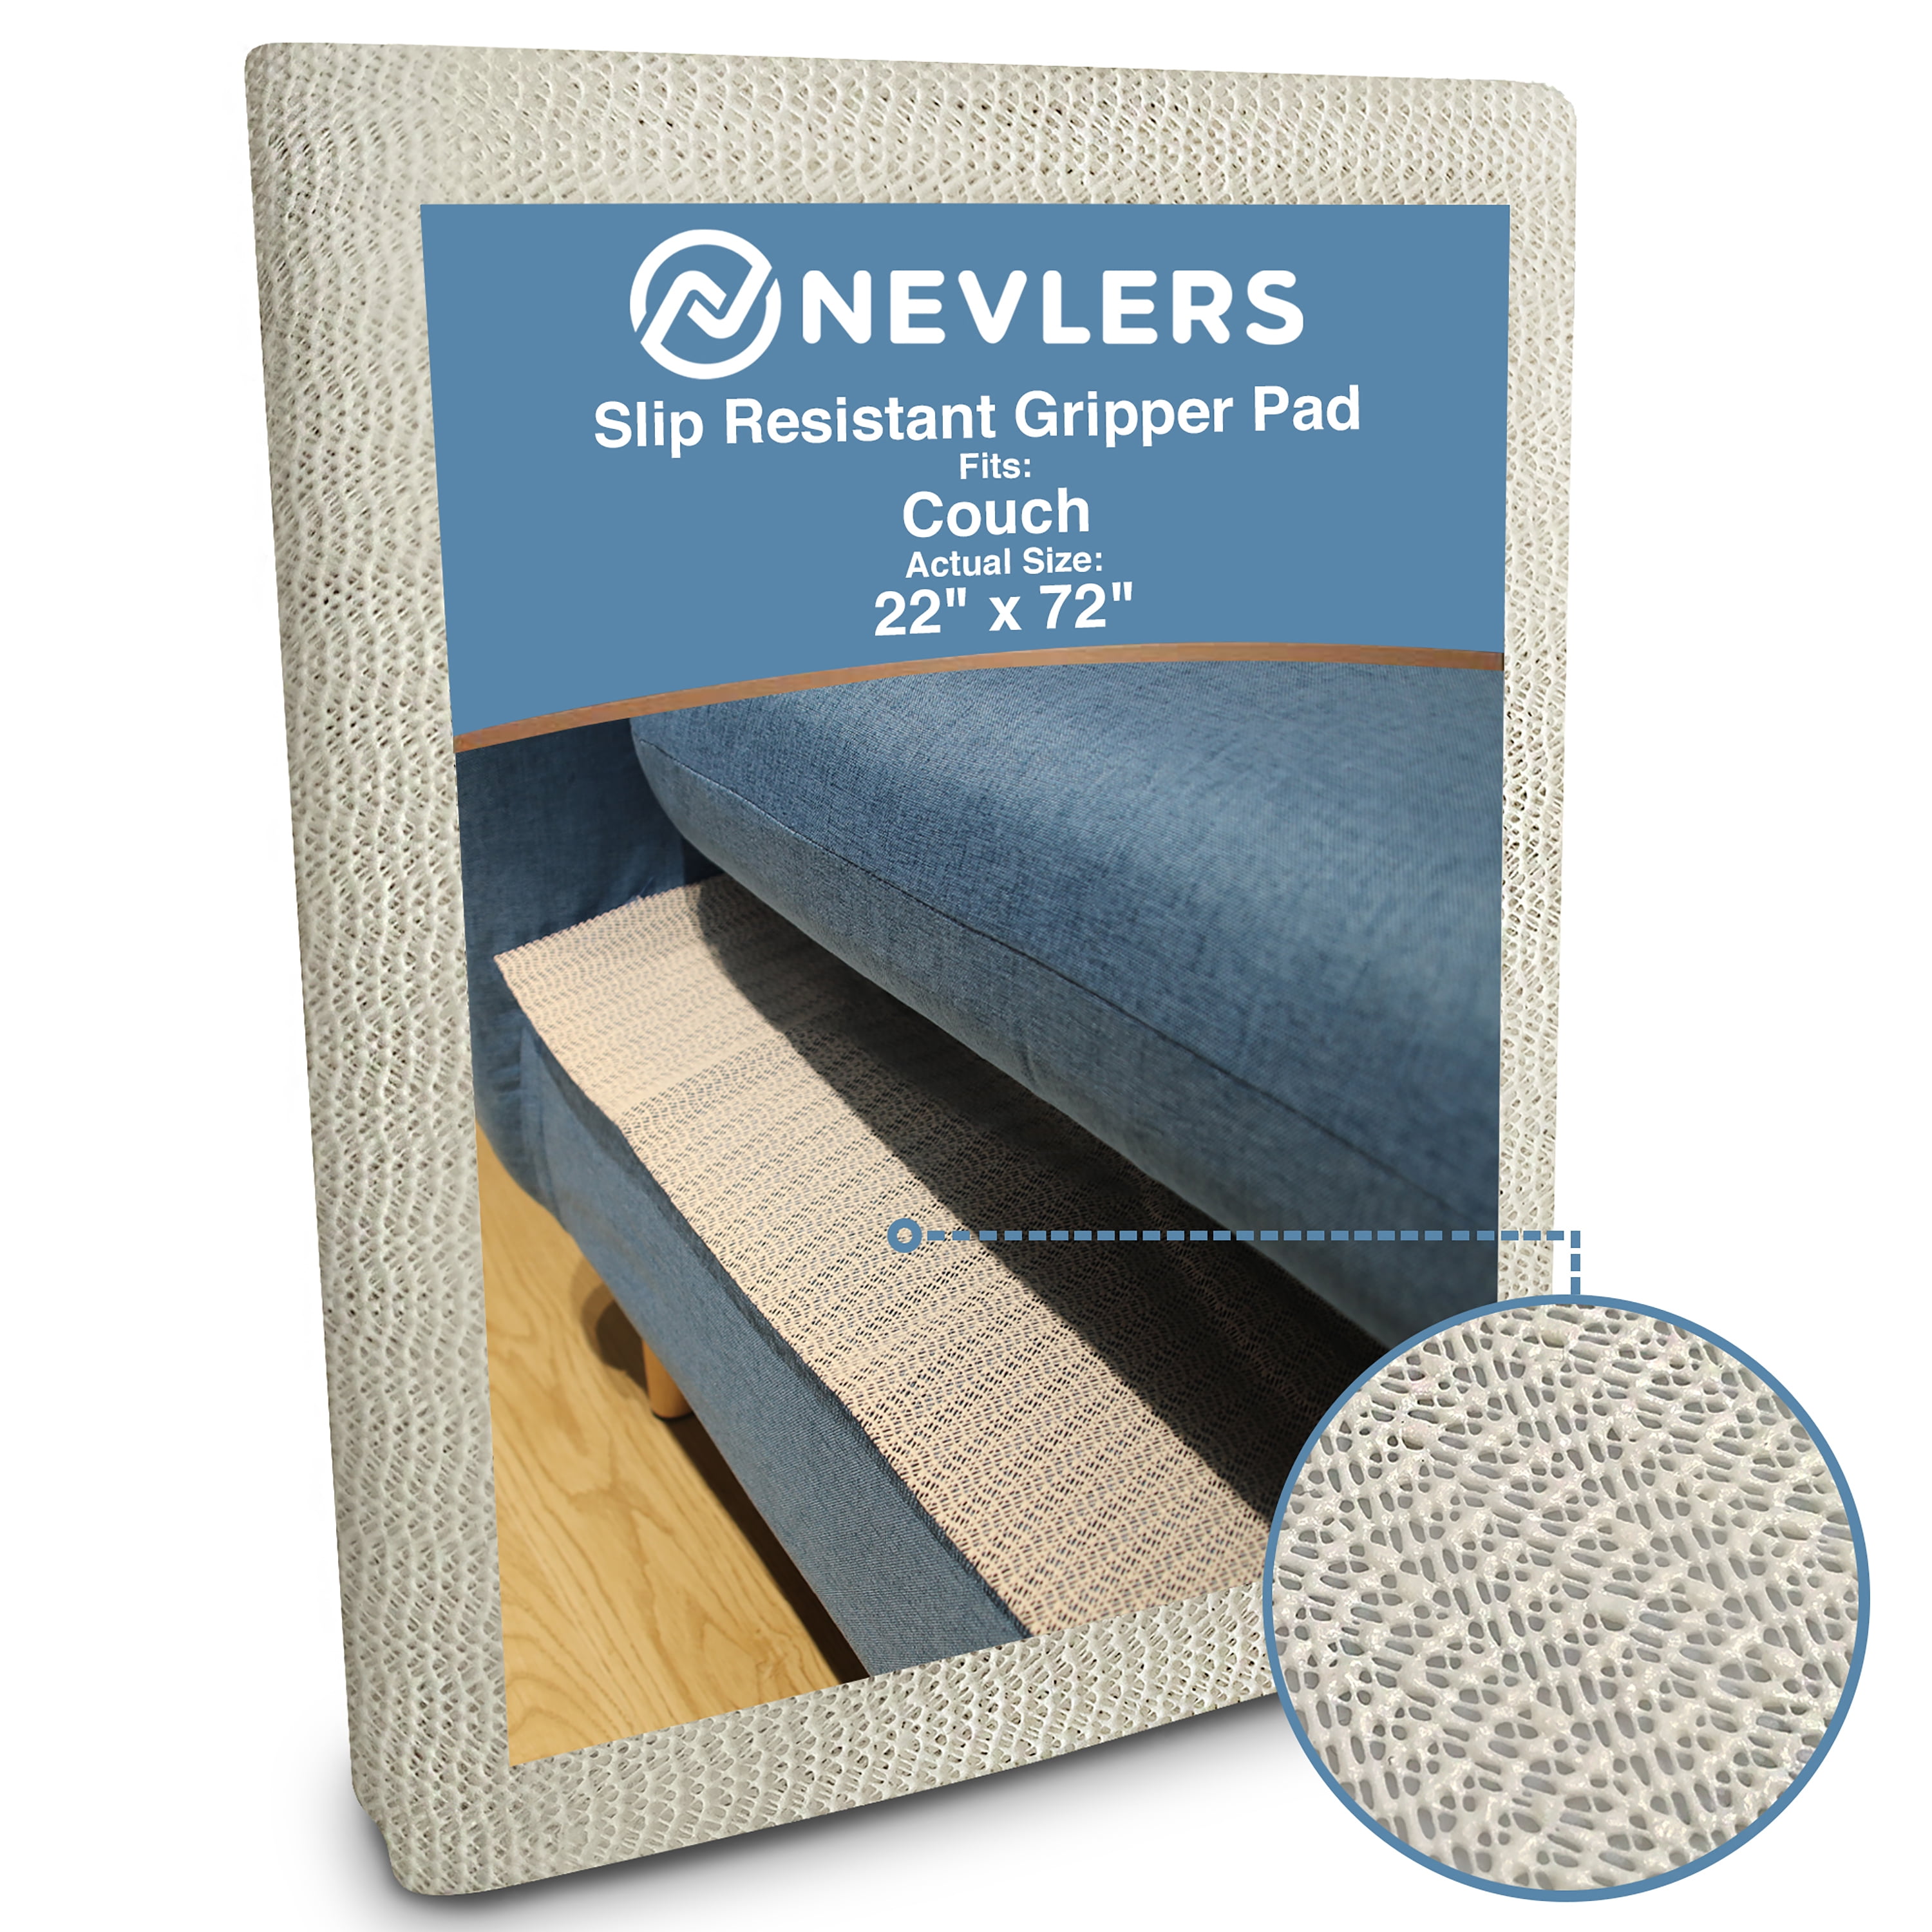 Nevlers 2 Pack 24x24 Couch Cushion Grip for Armchair, Helps Keep Couch Cushions from Sliding | Water Resistant Non Slip Couch Pads | Durable